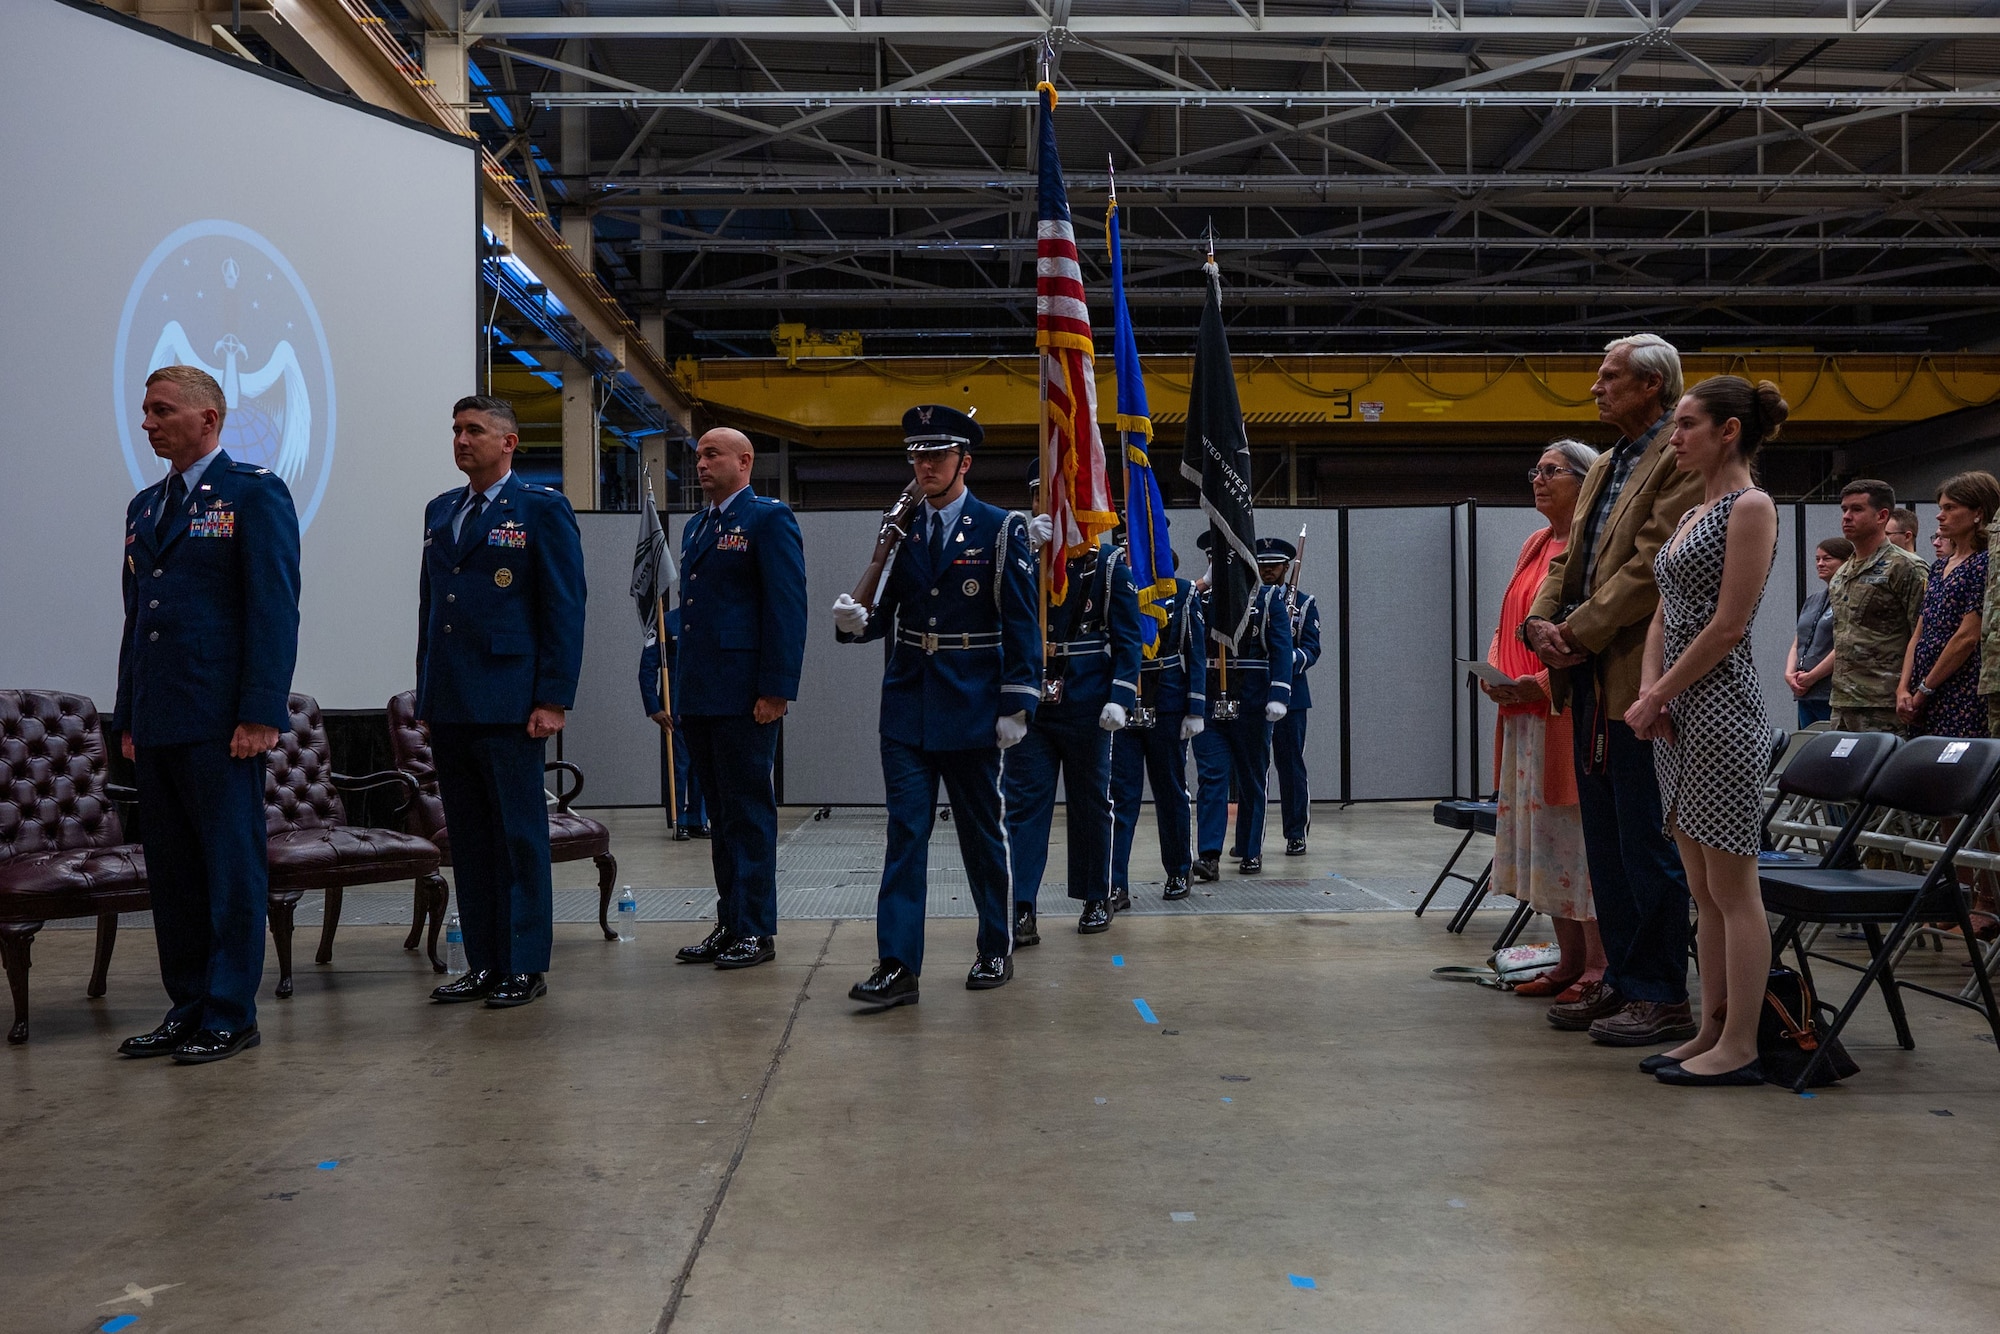 The Vandenberg Honor Guard team presents the colors at the beginning of the 65th Cyberspace Squadron change of command ceremony at Vandenberg Space Force Base, Calif., July 21, 2023. (U.S. Space Force photo by Tech. Sgt. Luke Kitterman)